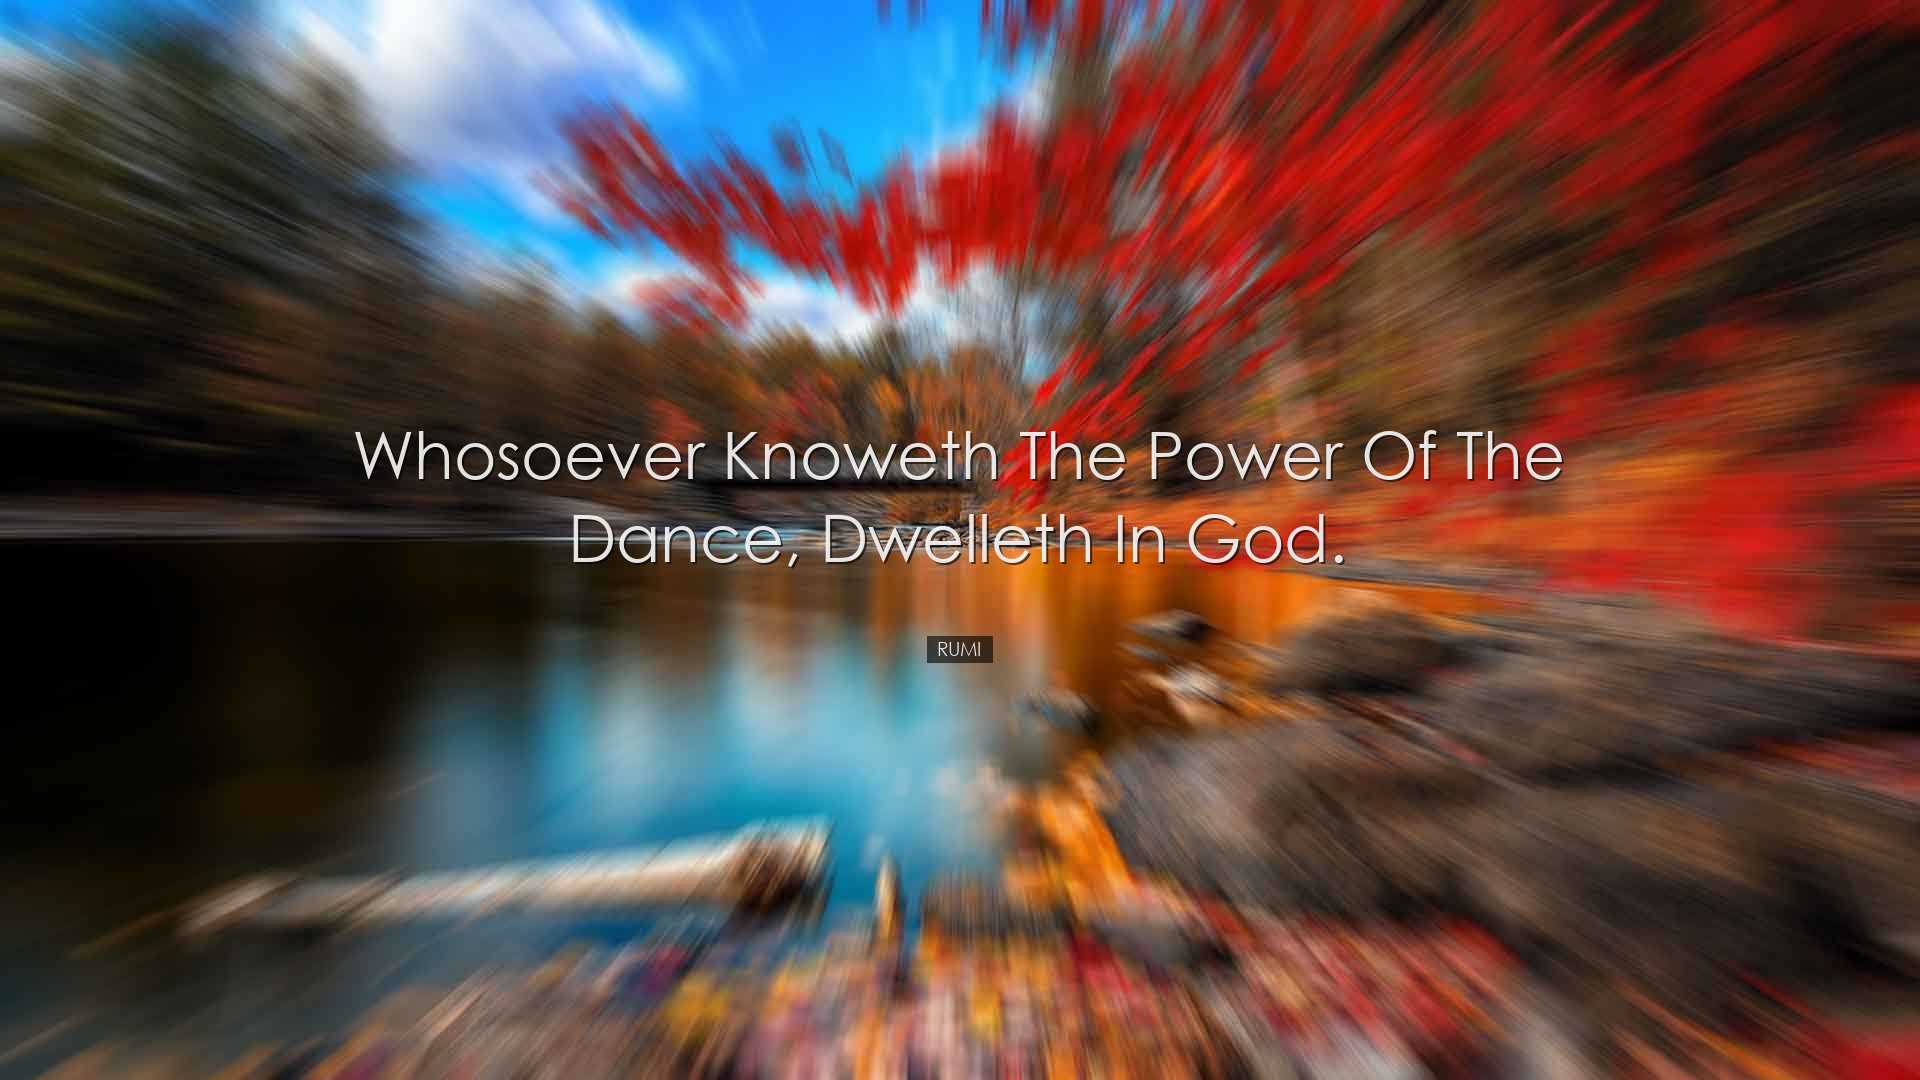 Whosoever knoweth the power of the dance, dwelleth in God. - Rumi